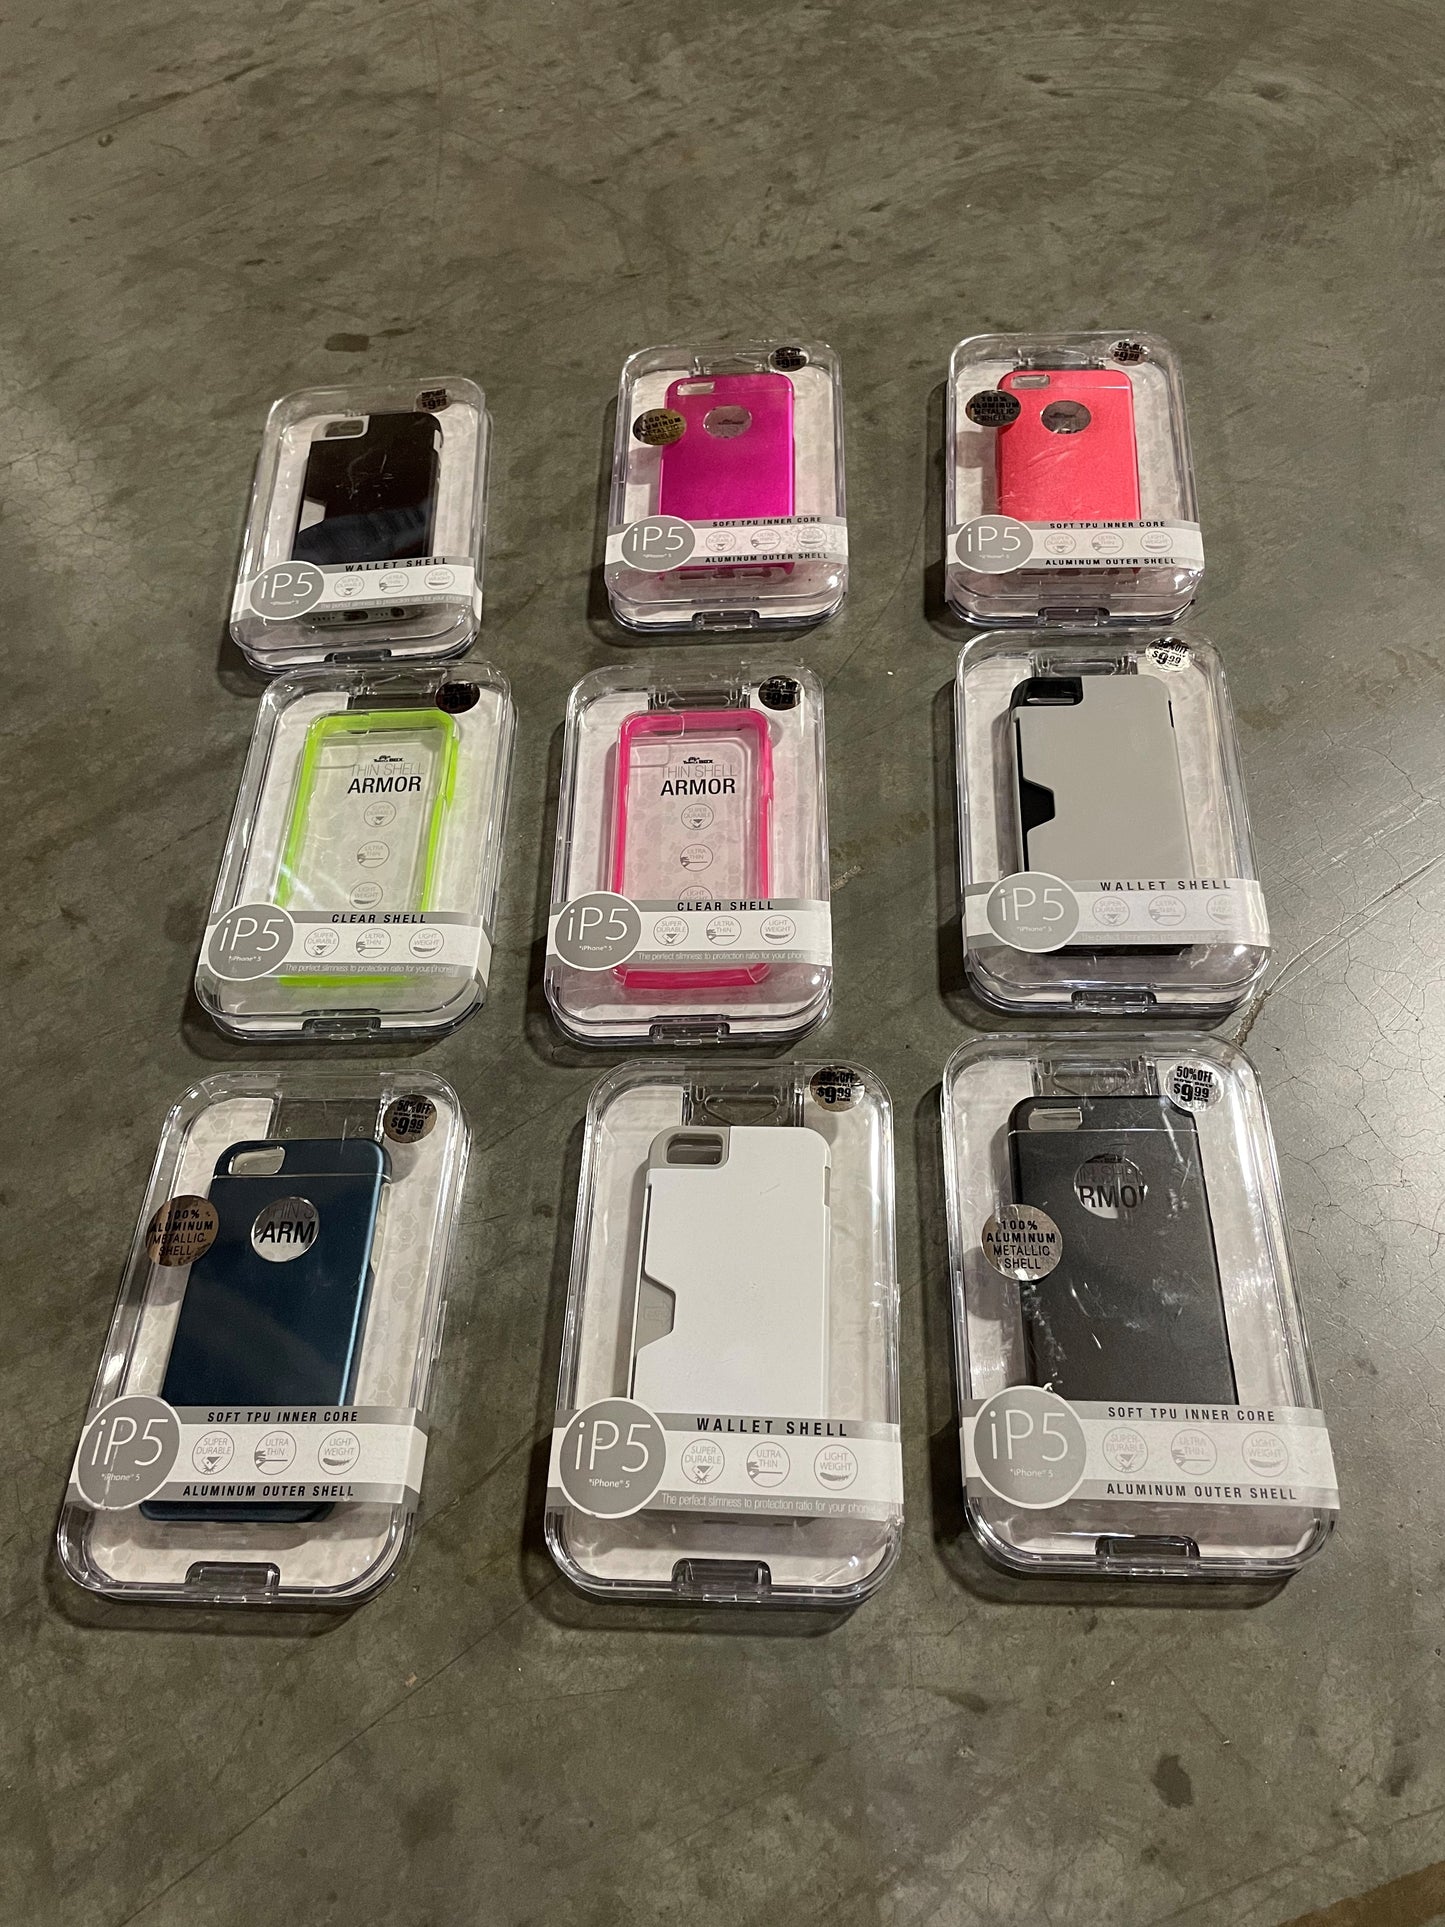 ITEM NUMBER 020946C THIN ARMOR CASE IP6 - BULK PACKED SOLD AS IS 70 PIECES PER CASE